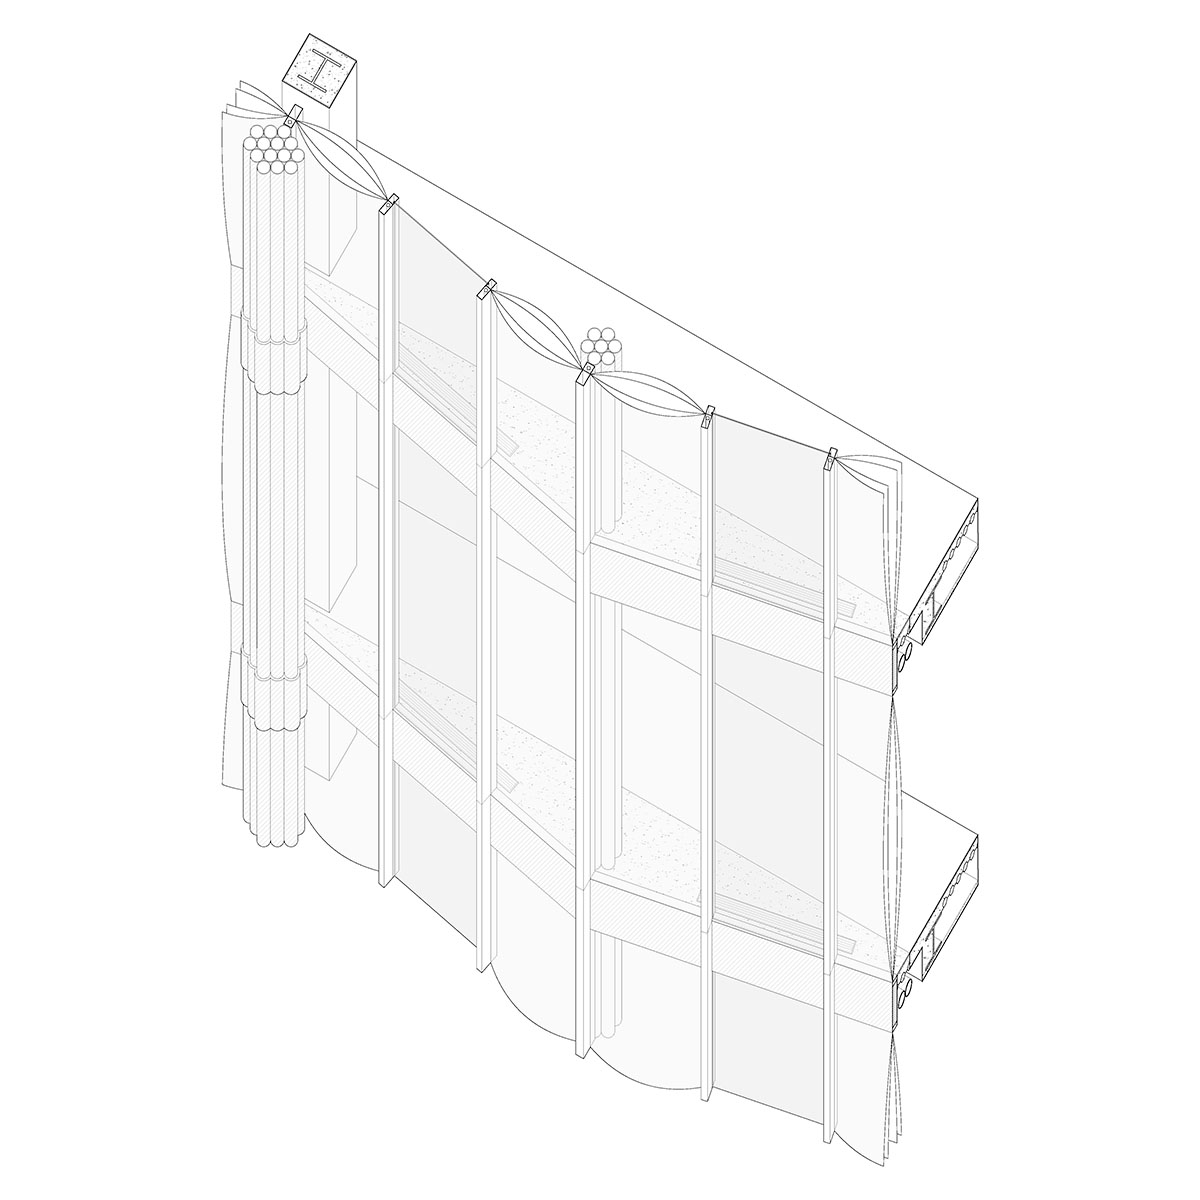 Black and white axonometric drawing of glass facade with angled glass